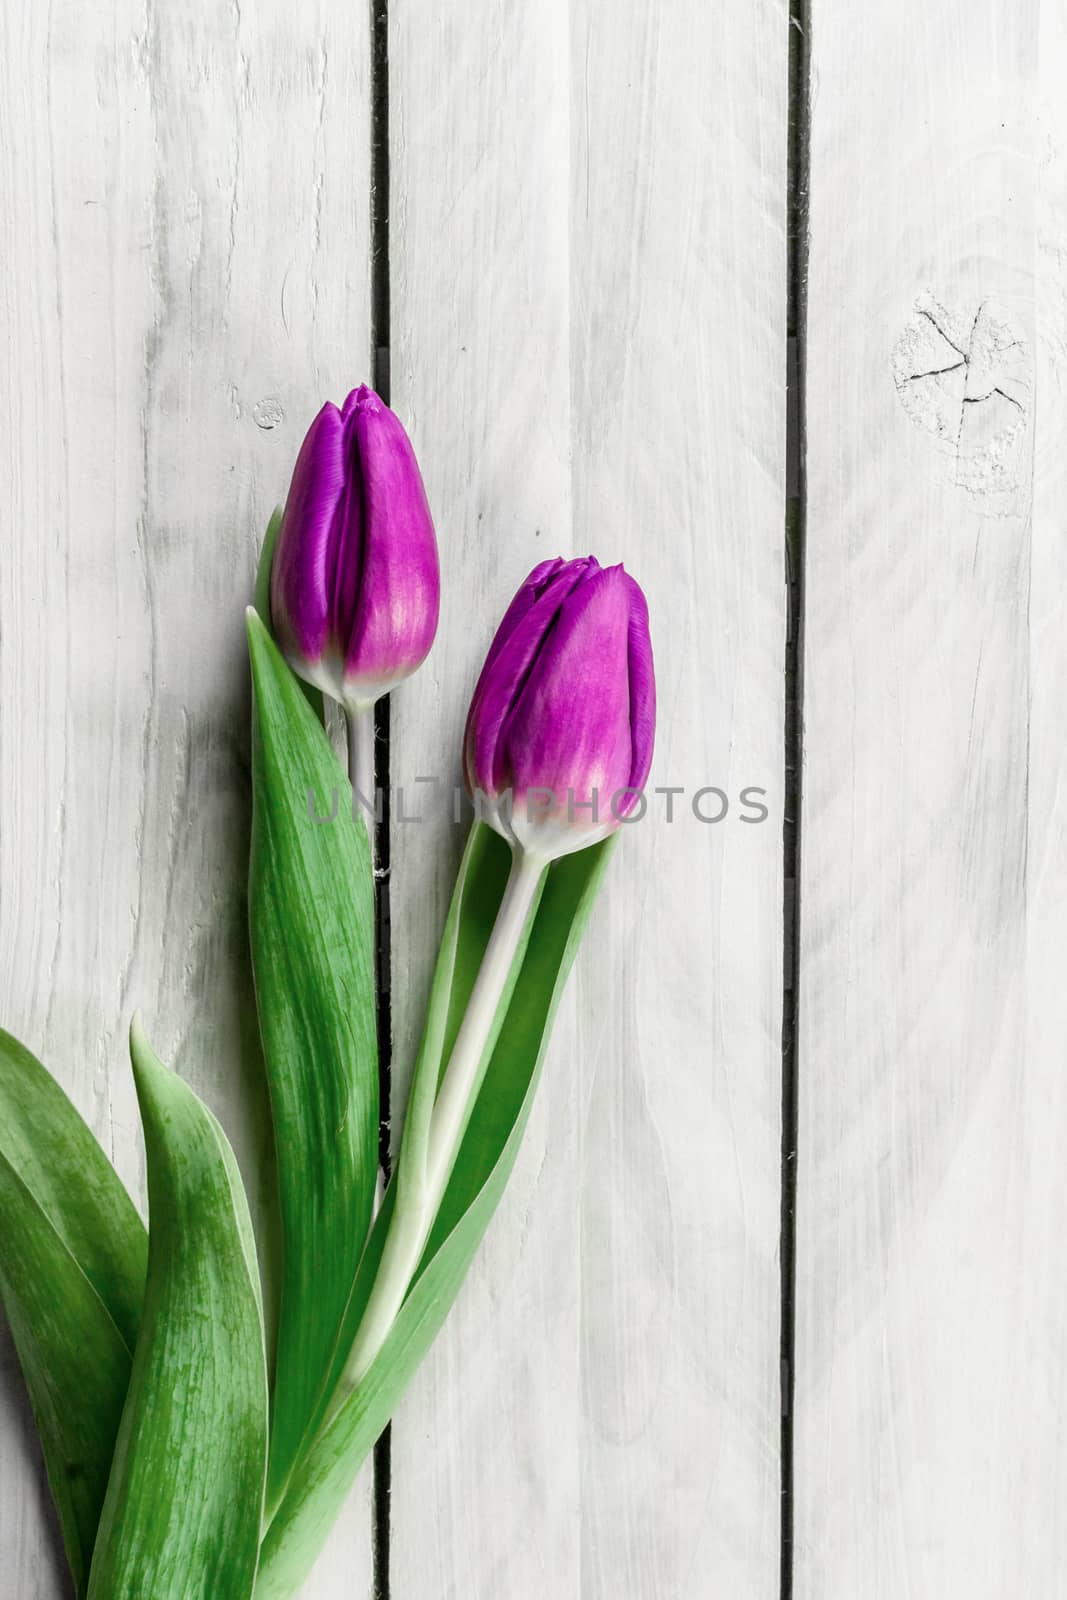 Wooden background with tulip flowers